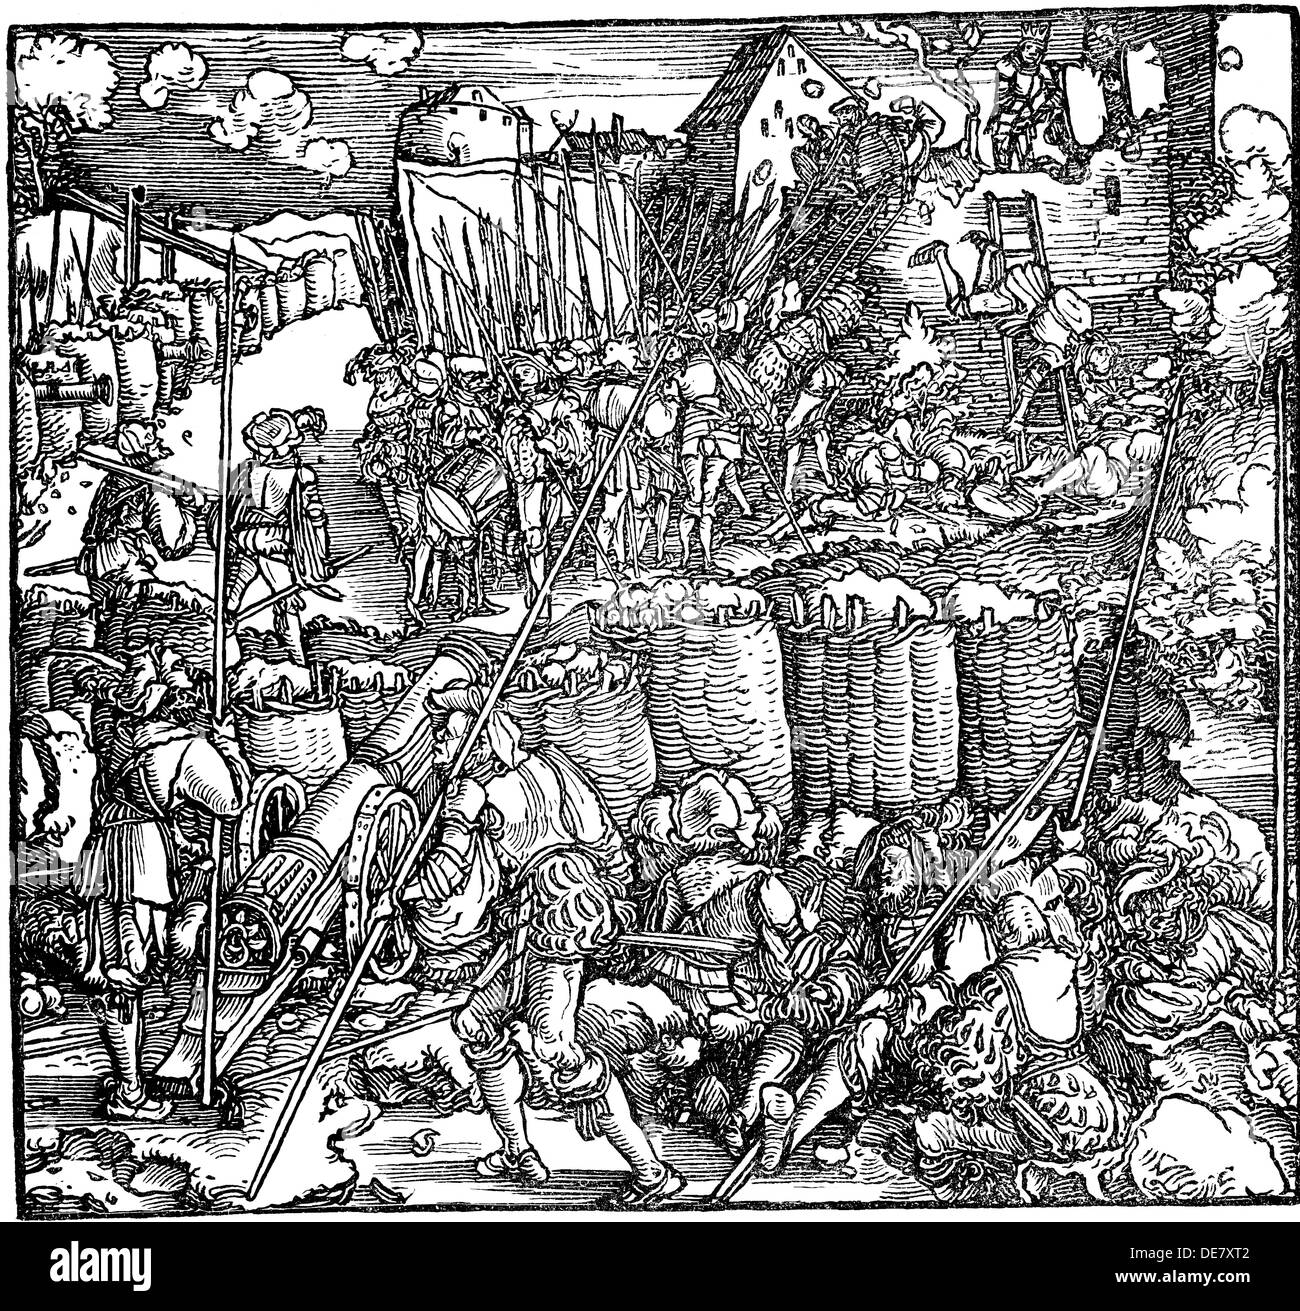 Siege of a fortress. Illustration from the book Phisicke Against Fortune by Petrarch, 1532. Stock Photo